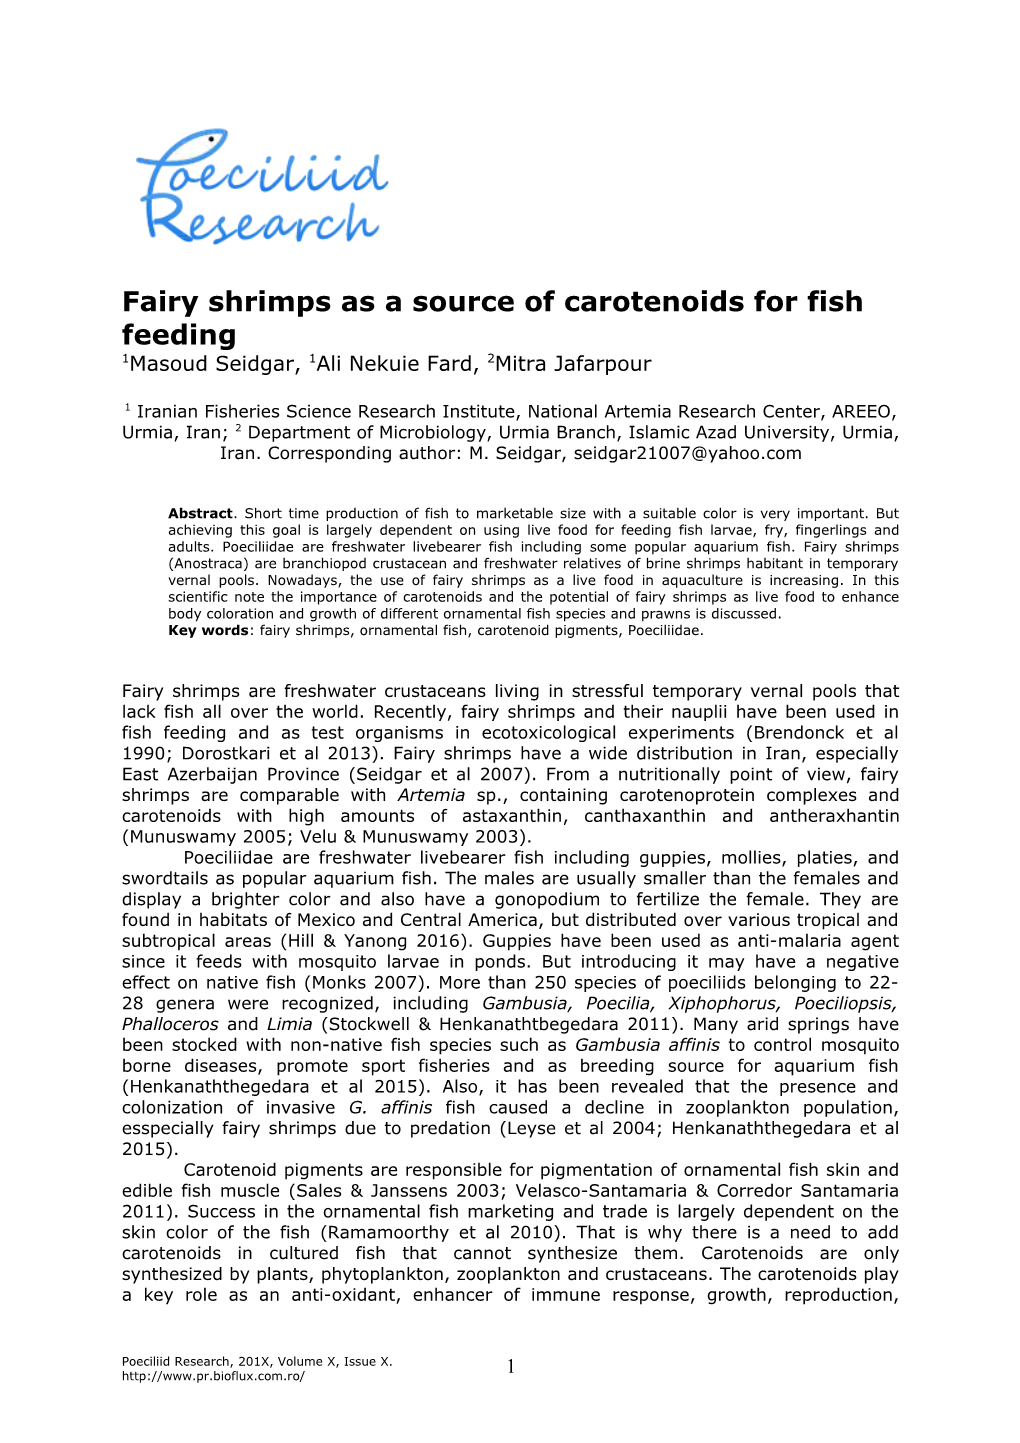 Fairy Shrimps As a Source of Carotenoids for Fish Feeding